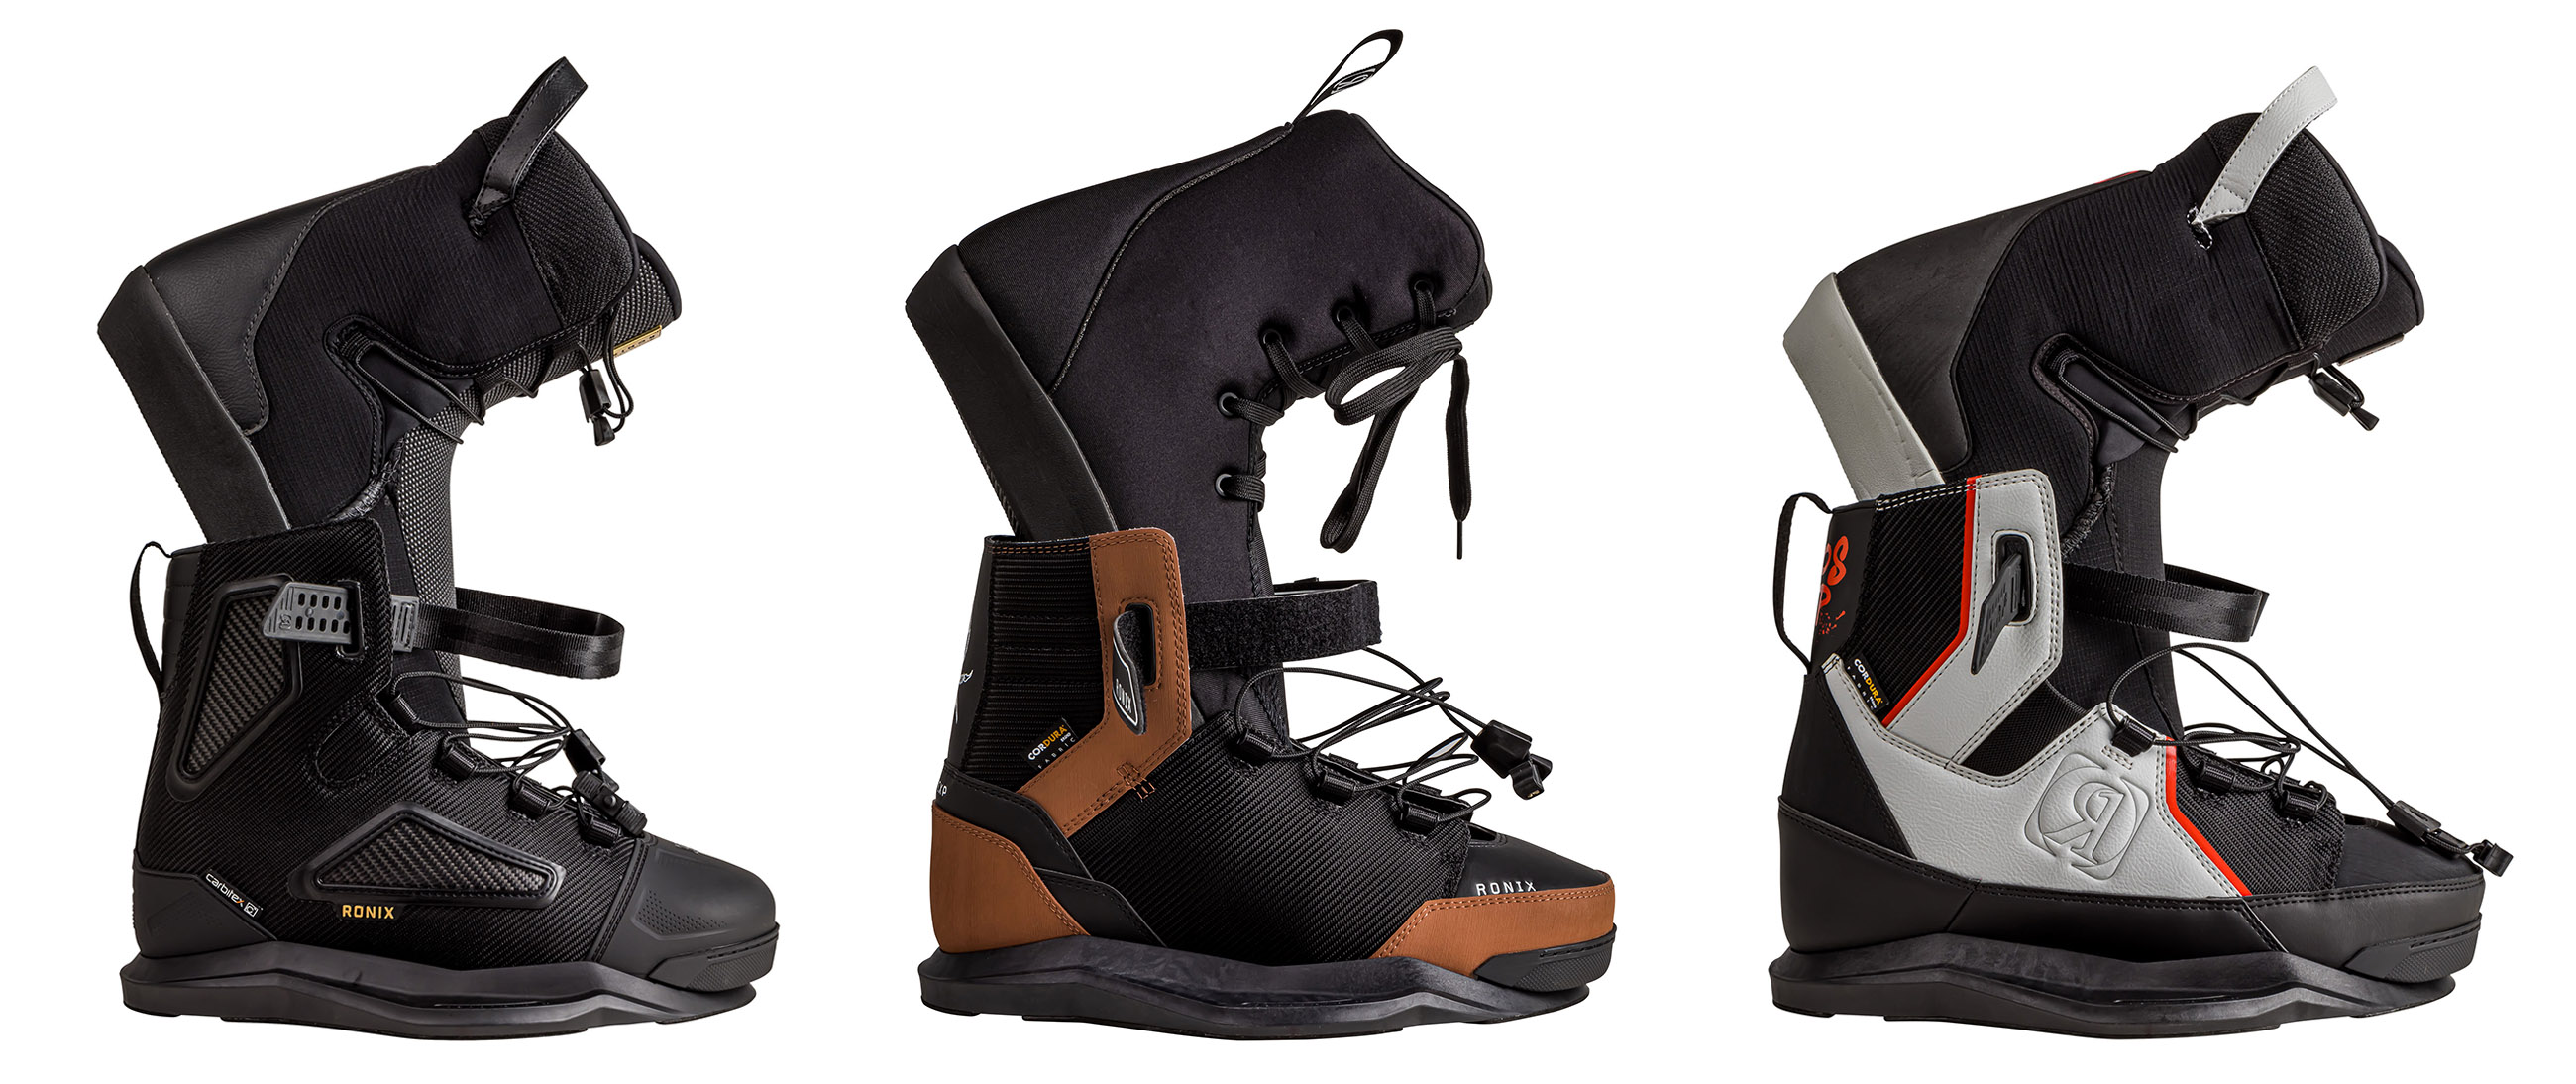 2023 RONIX Boots in stock;Kinetik, Diplomat, Atmos, ONE, Carbitex, RXT, ... ab sofort erhältlich